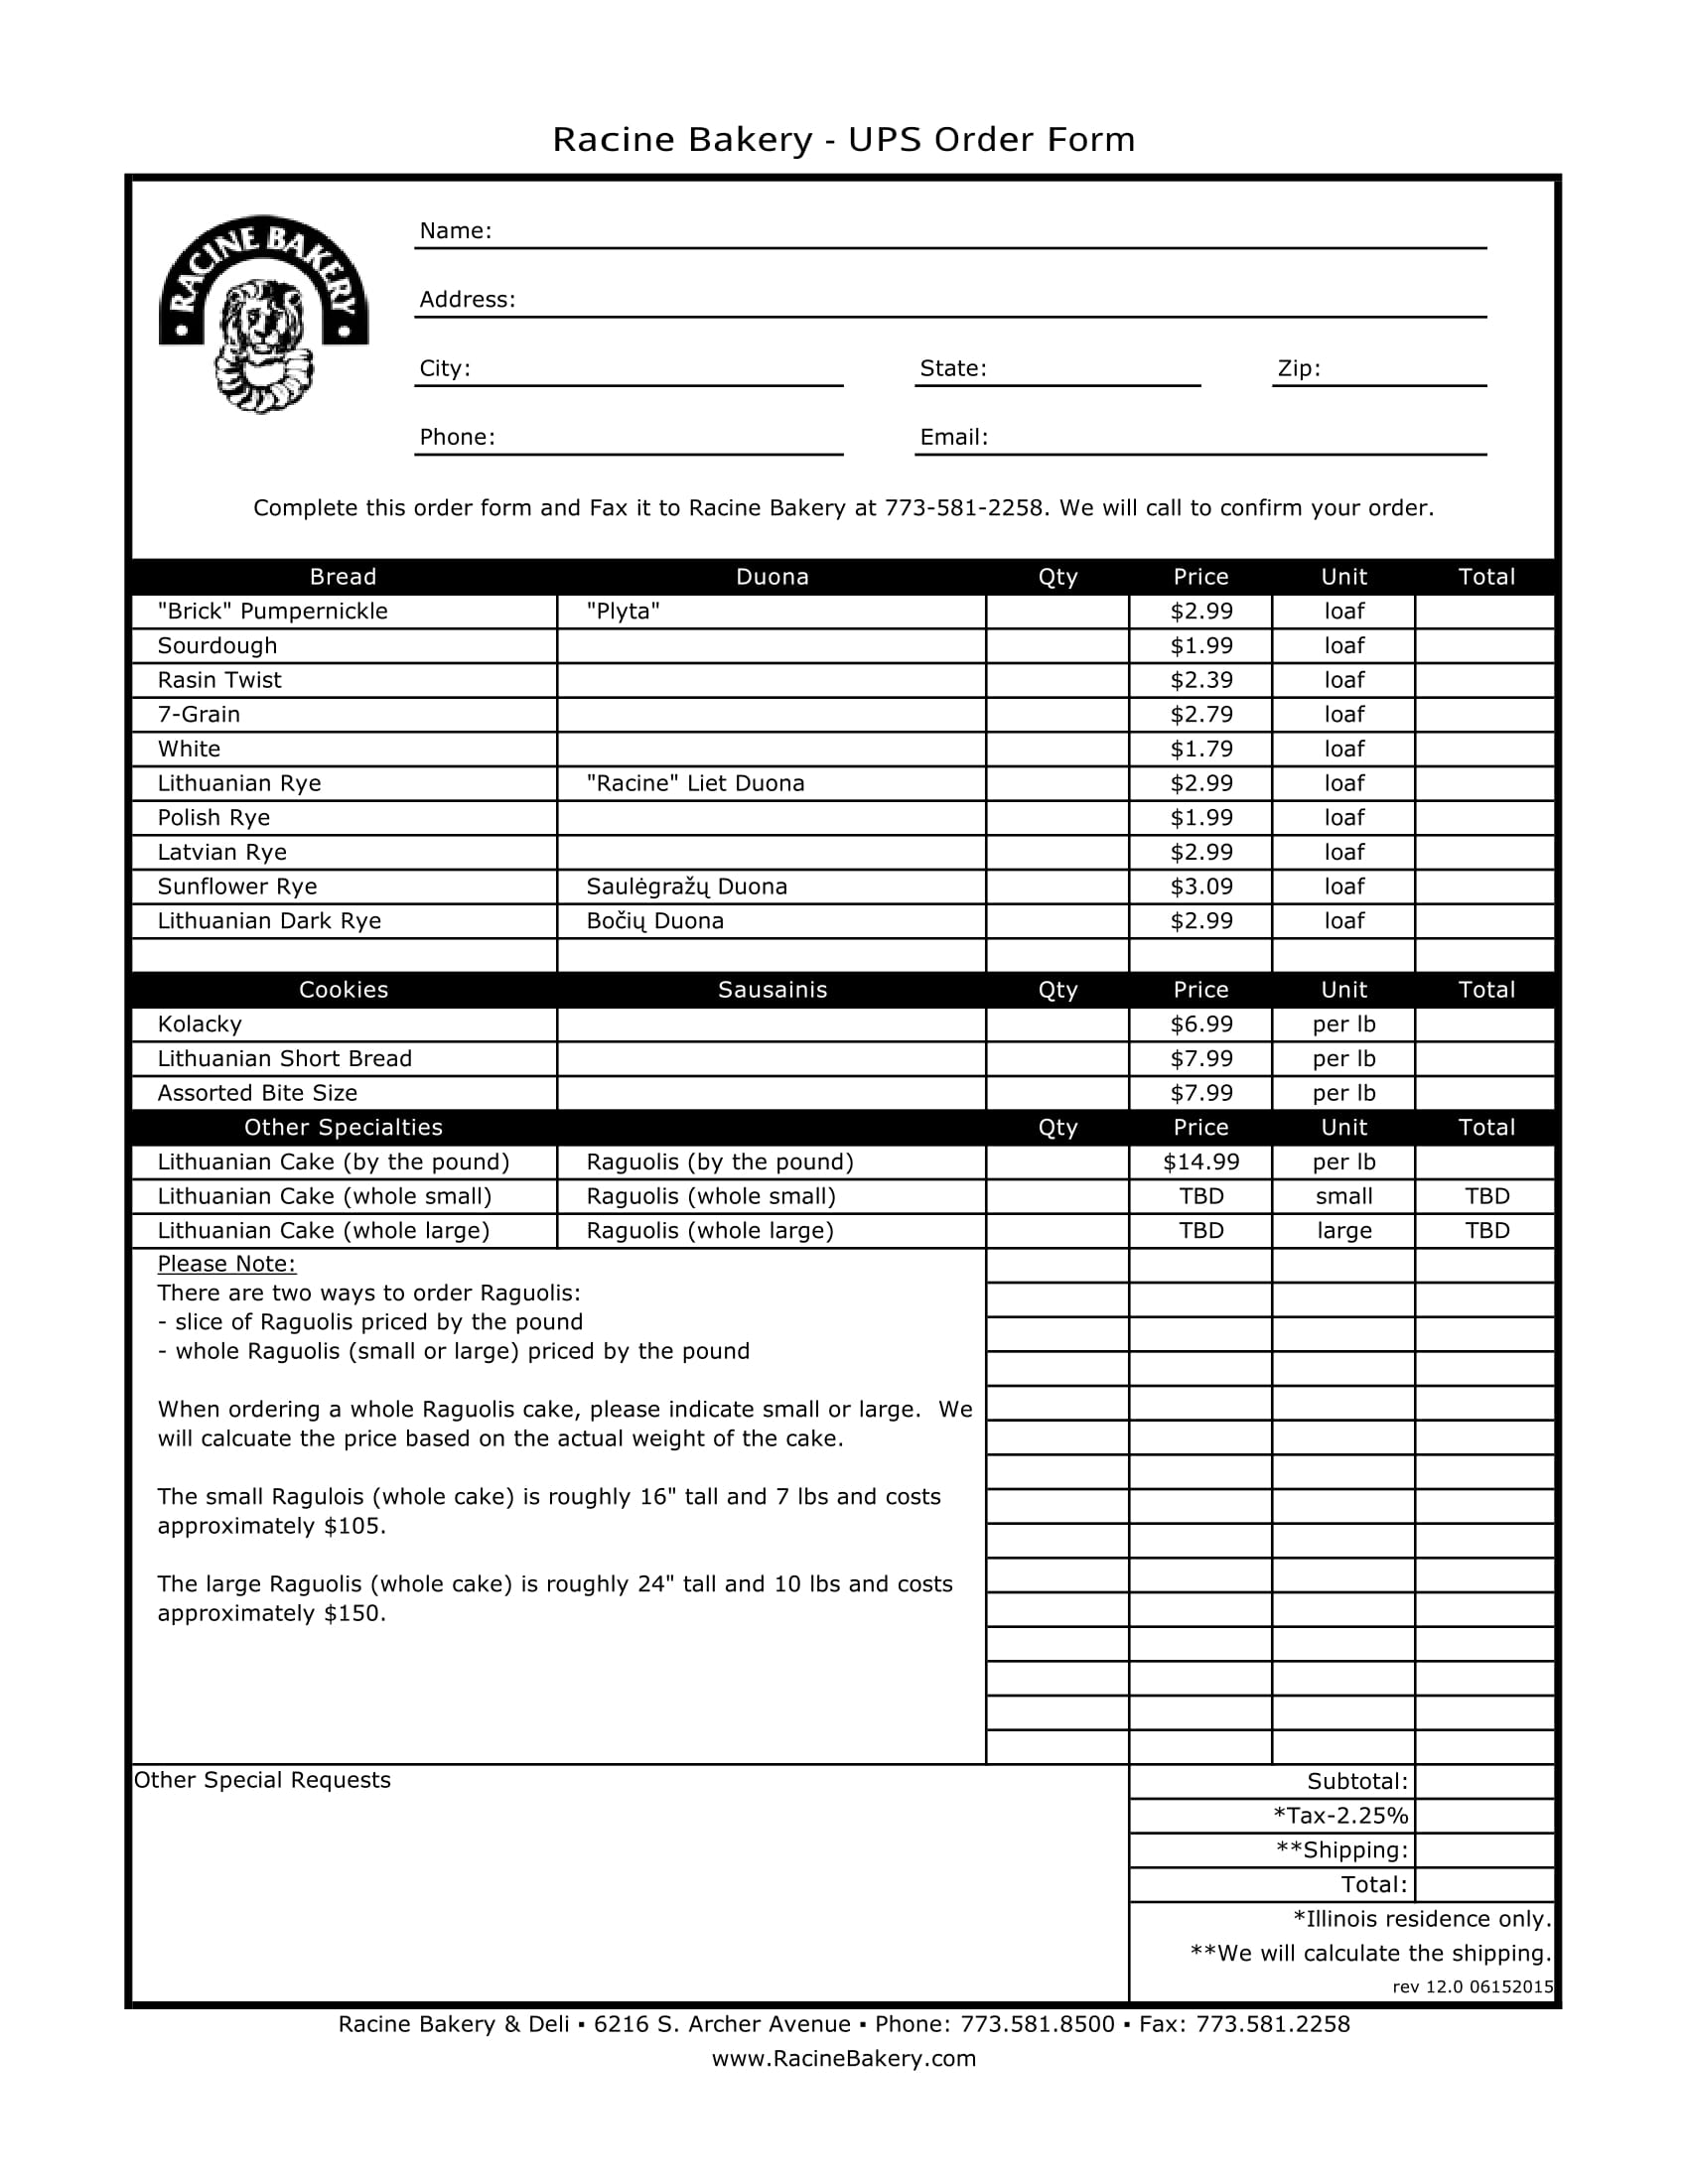 FREE 15+ Bakery Order Forms in PDF Excel